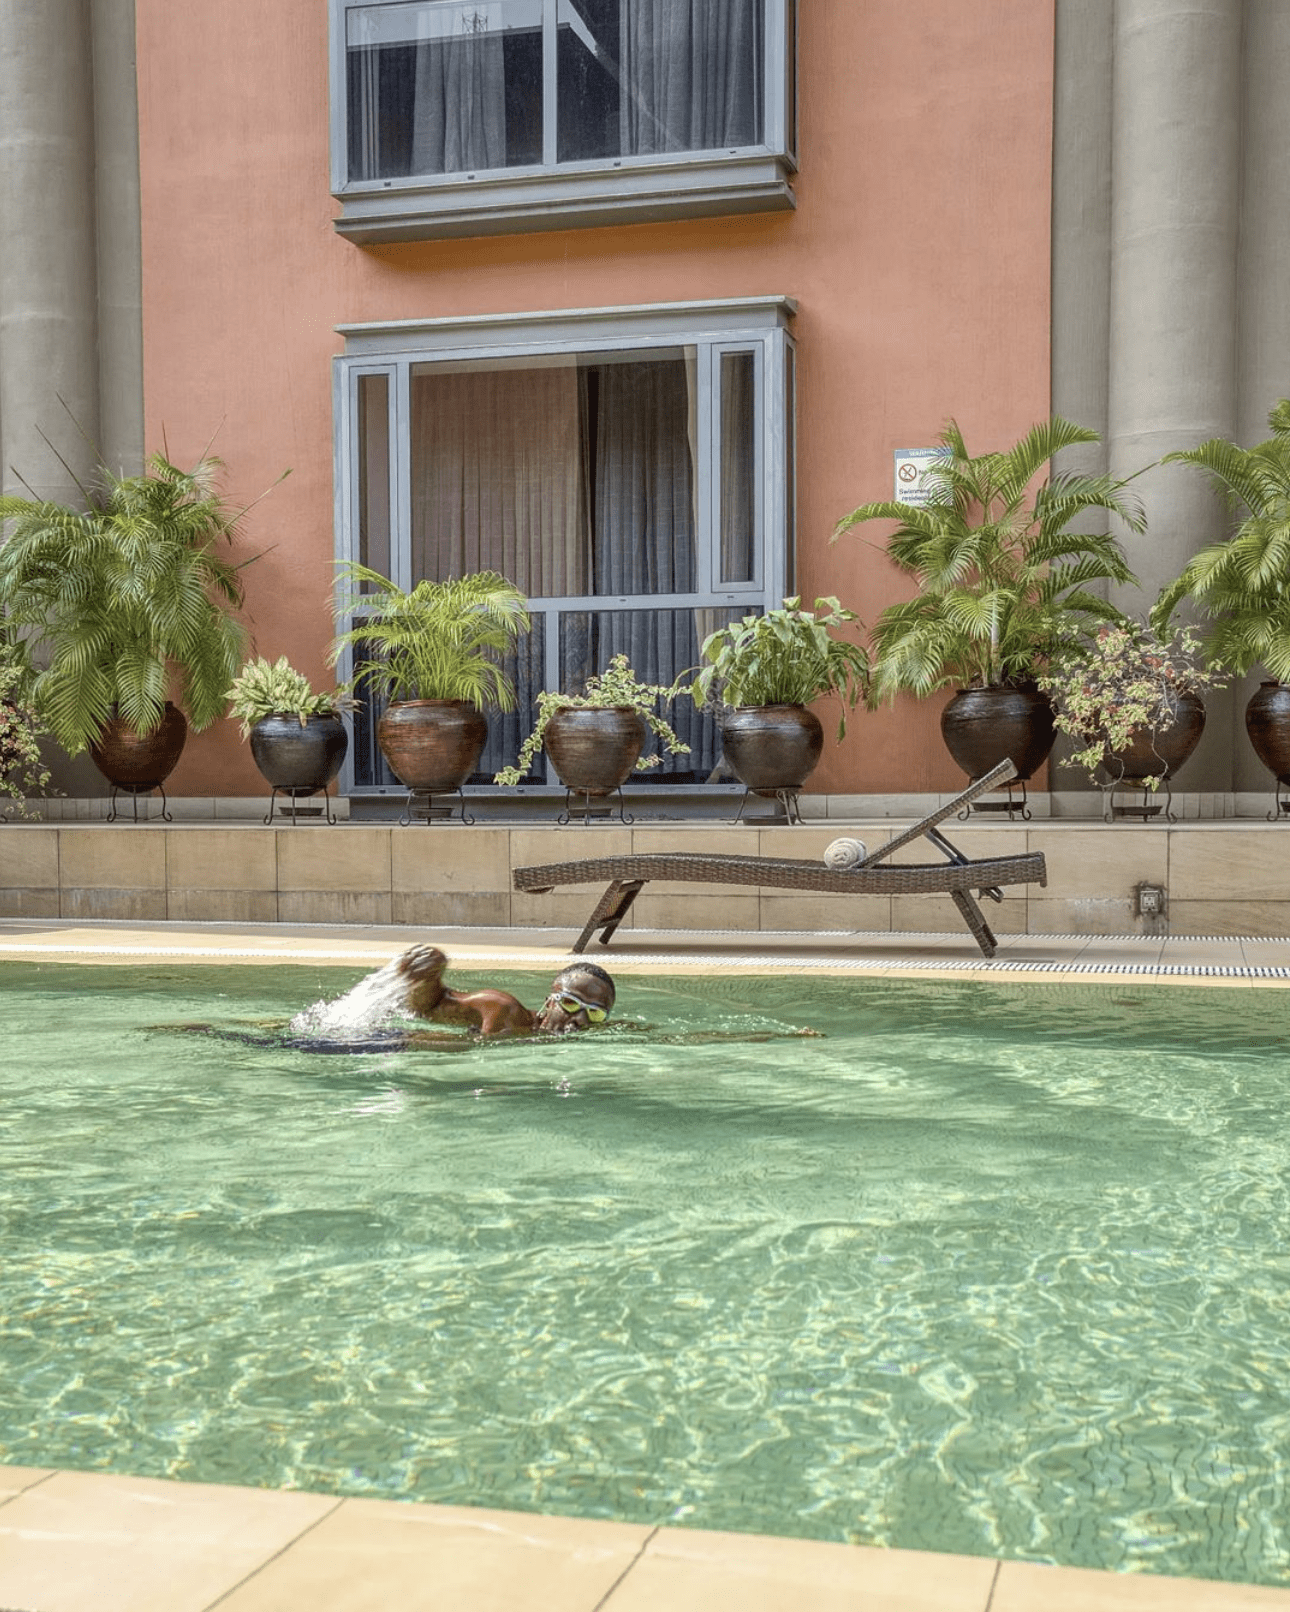 The best hotels in Lagos, Nigeria | The Wheatbaker, an outdoor swimming pool against a peach wall